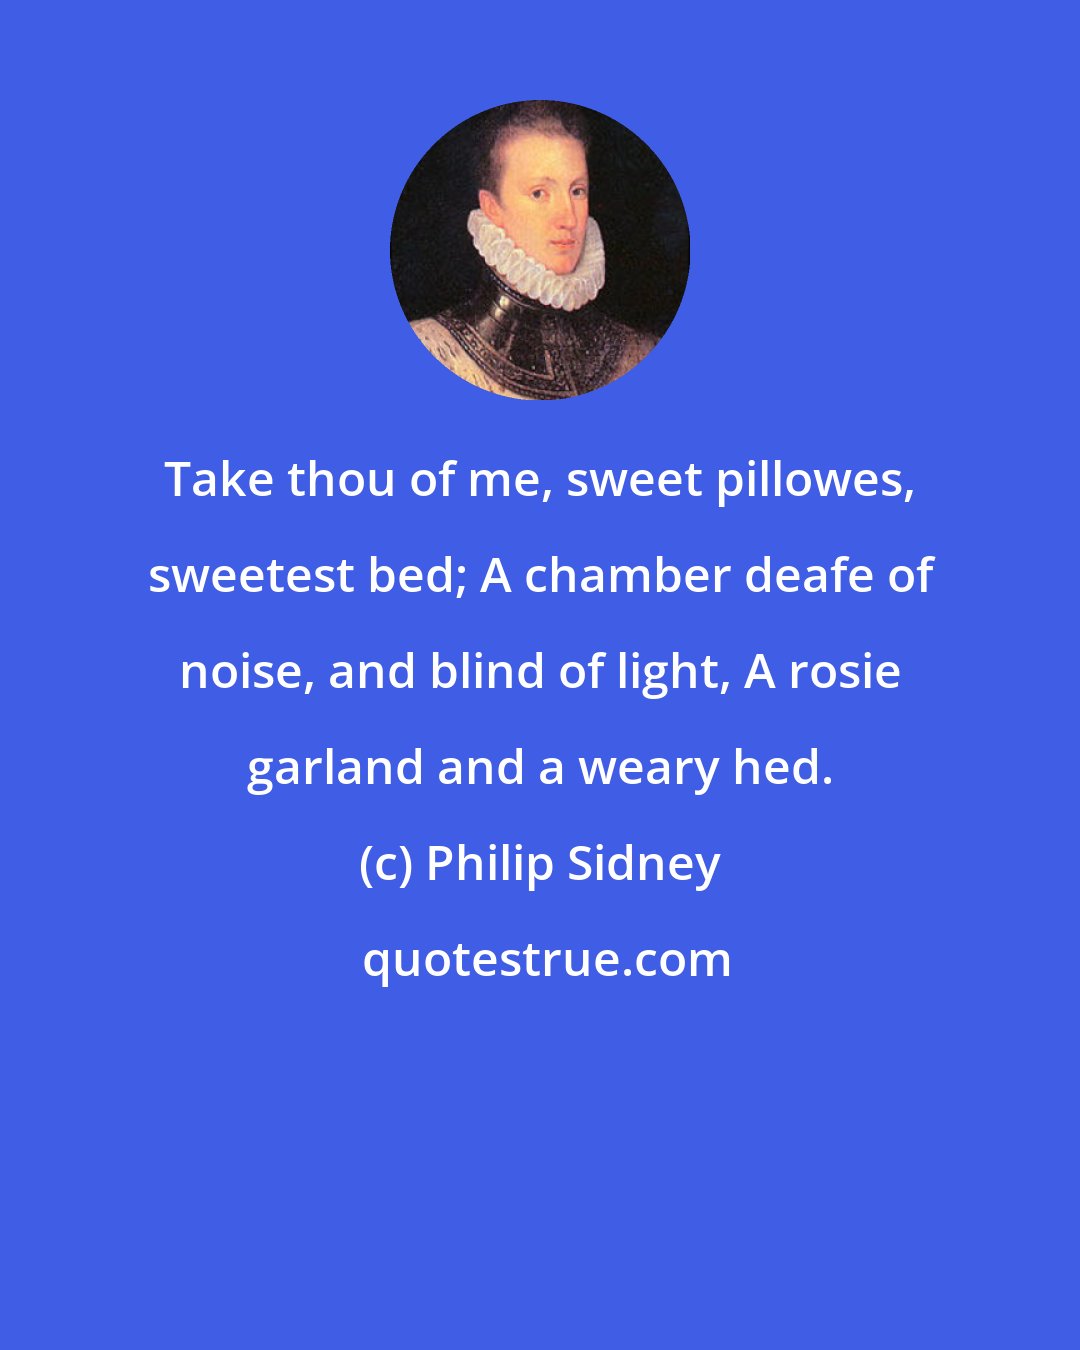 Philip Sidney: Take thou of me, sweet pillowes, sweetest bed; A chamber deafe of noise, and blind of light, A rosie garland and a weary hed.